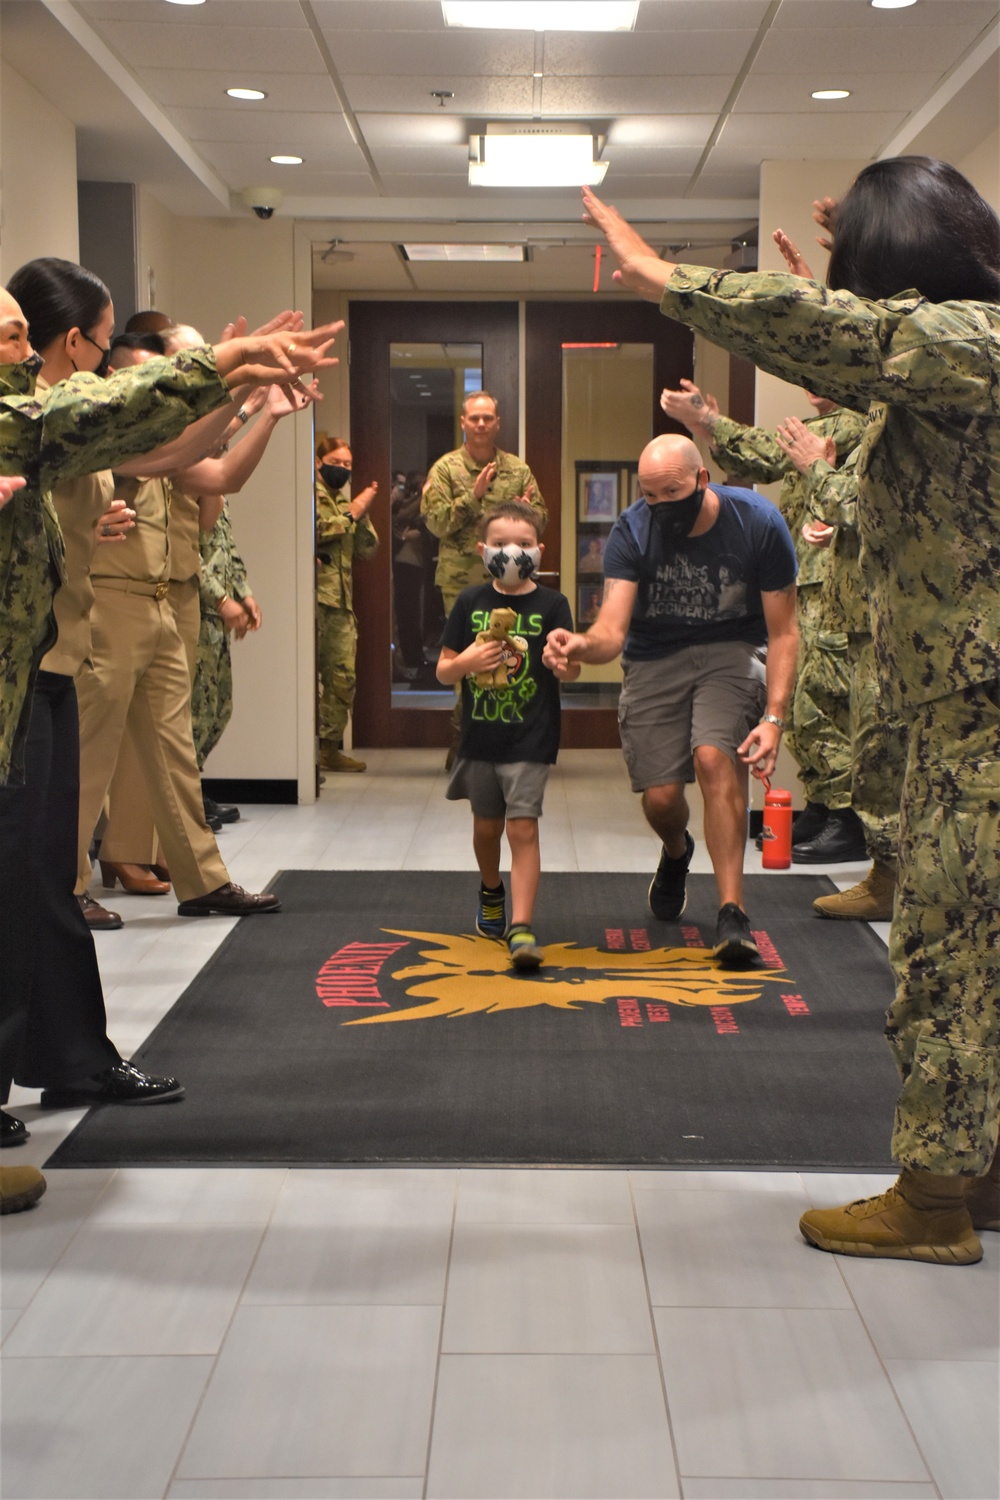 Phoenix recruiters honor terminally ill youngster with surprise party